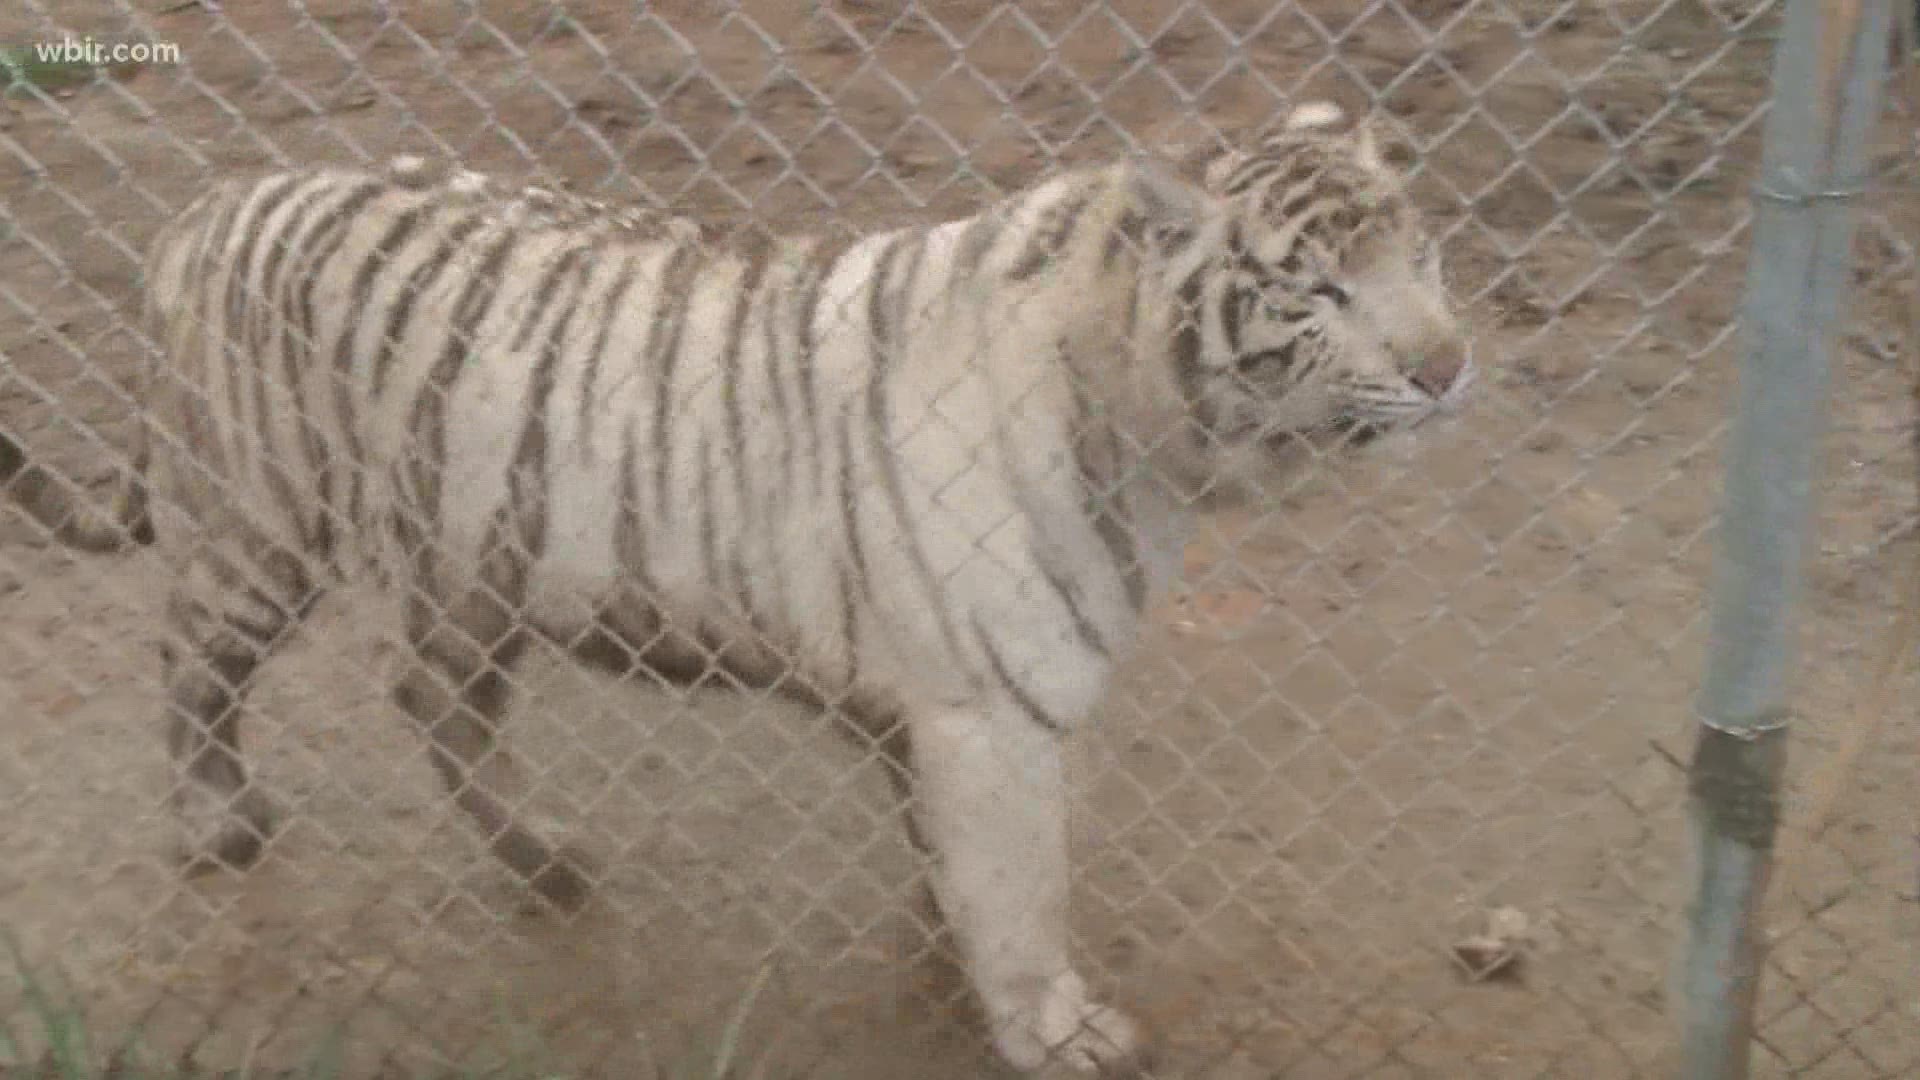 A worker at Tiger Haven in Roane County was bitten by a big cat. She was being treated in the hospital.